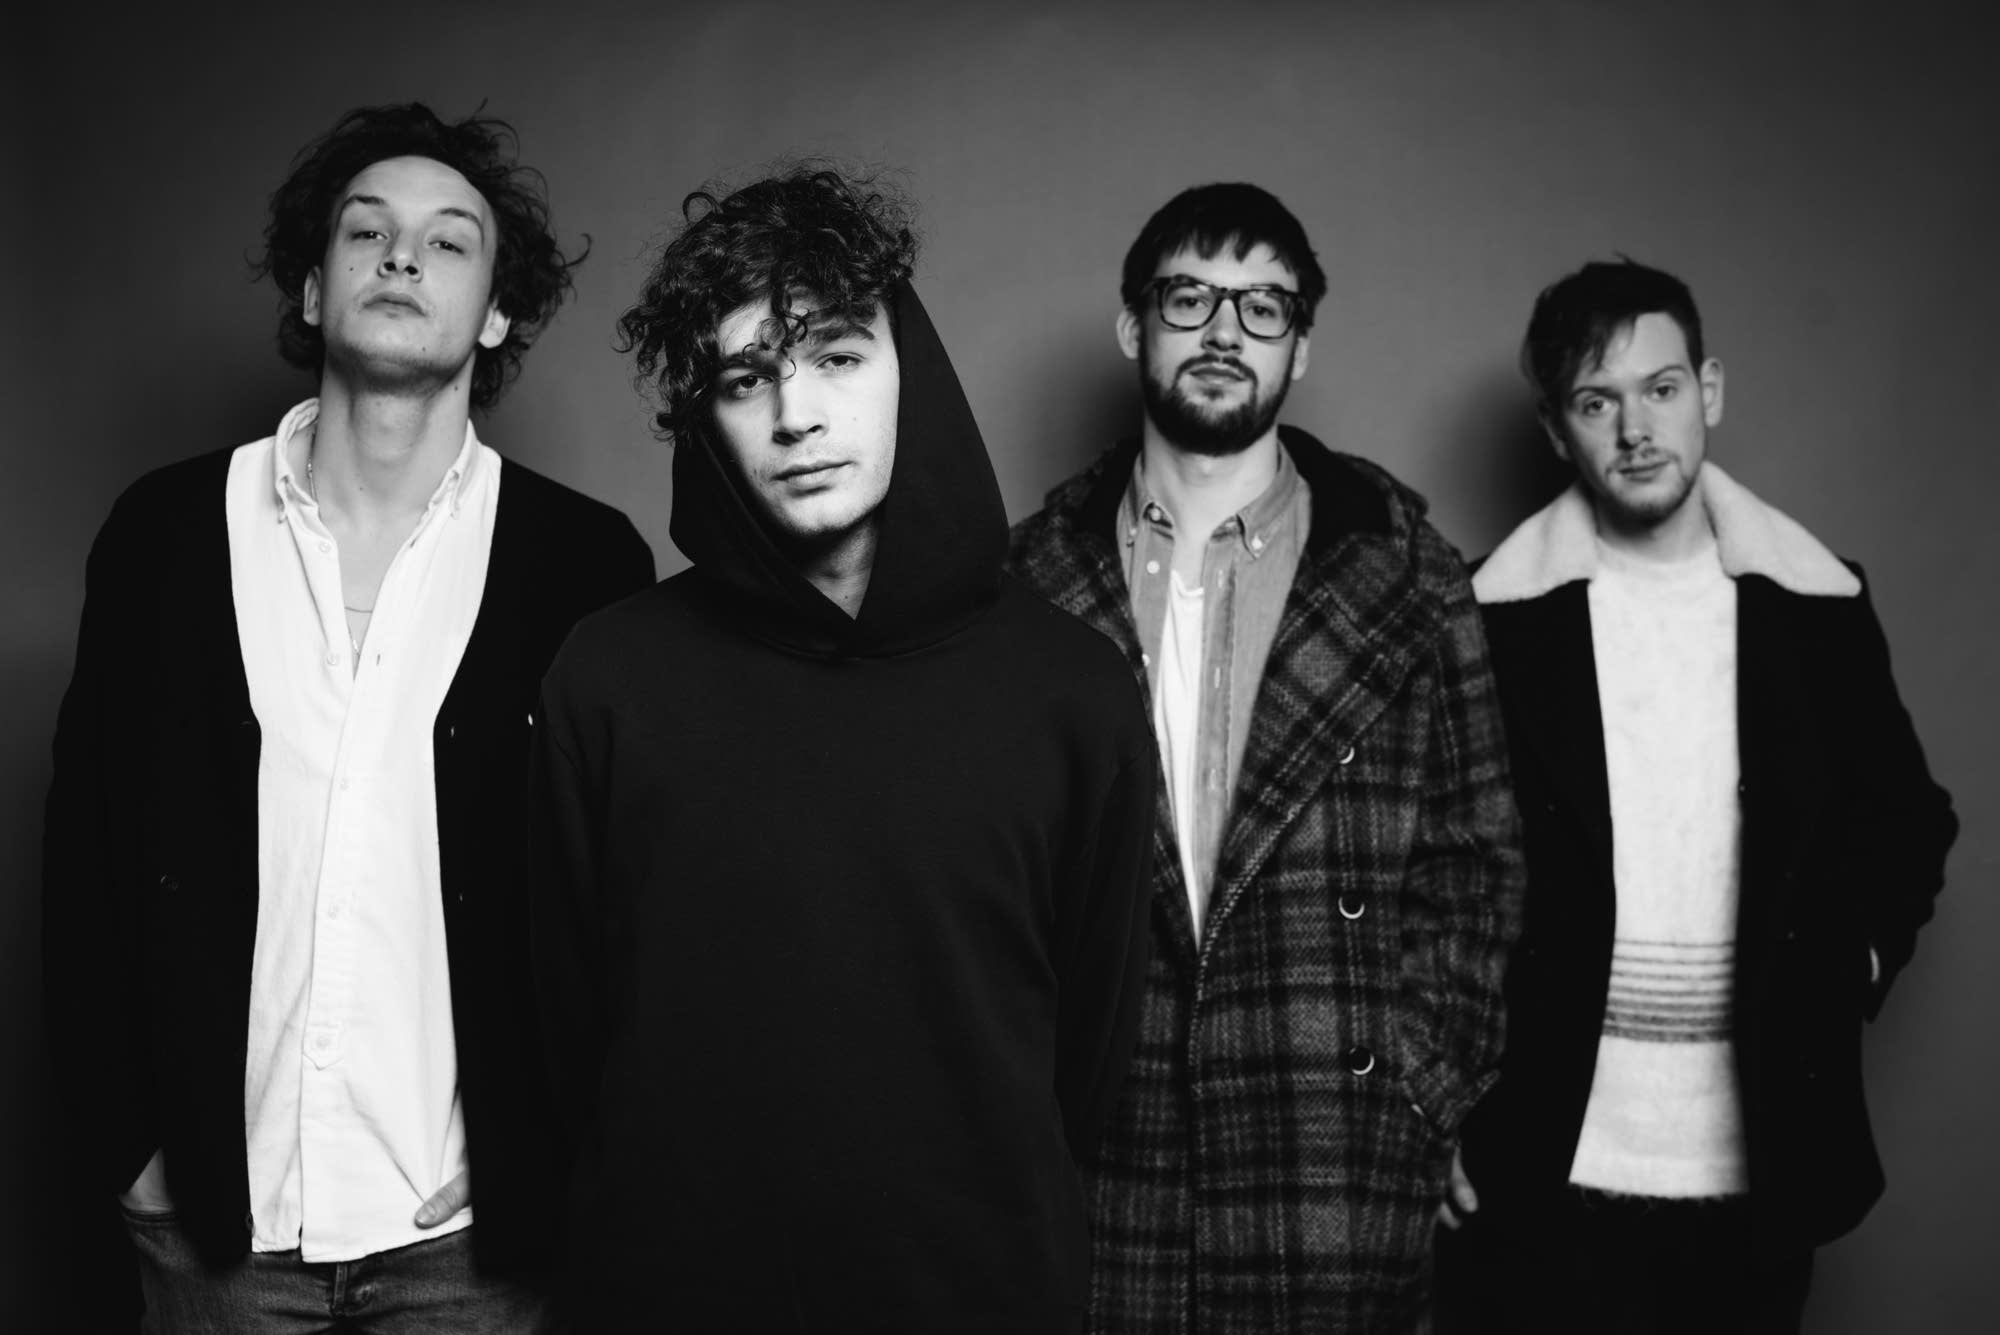 The 1975 lança videoclipe para inédita ‘If You’re Too Shy (Let Me Know)’; assista